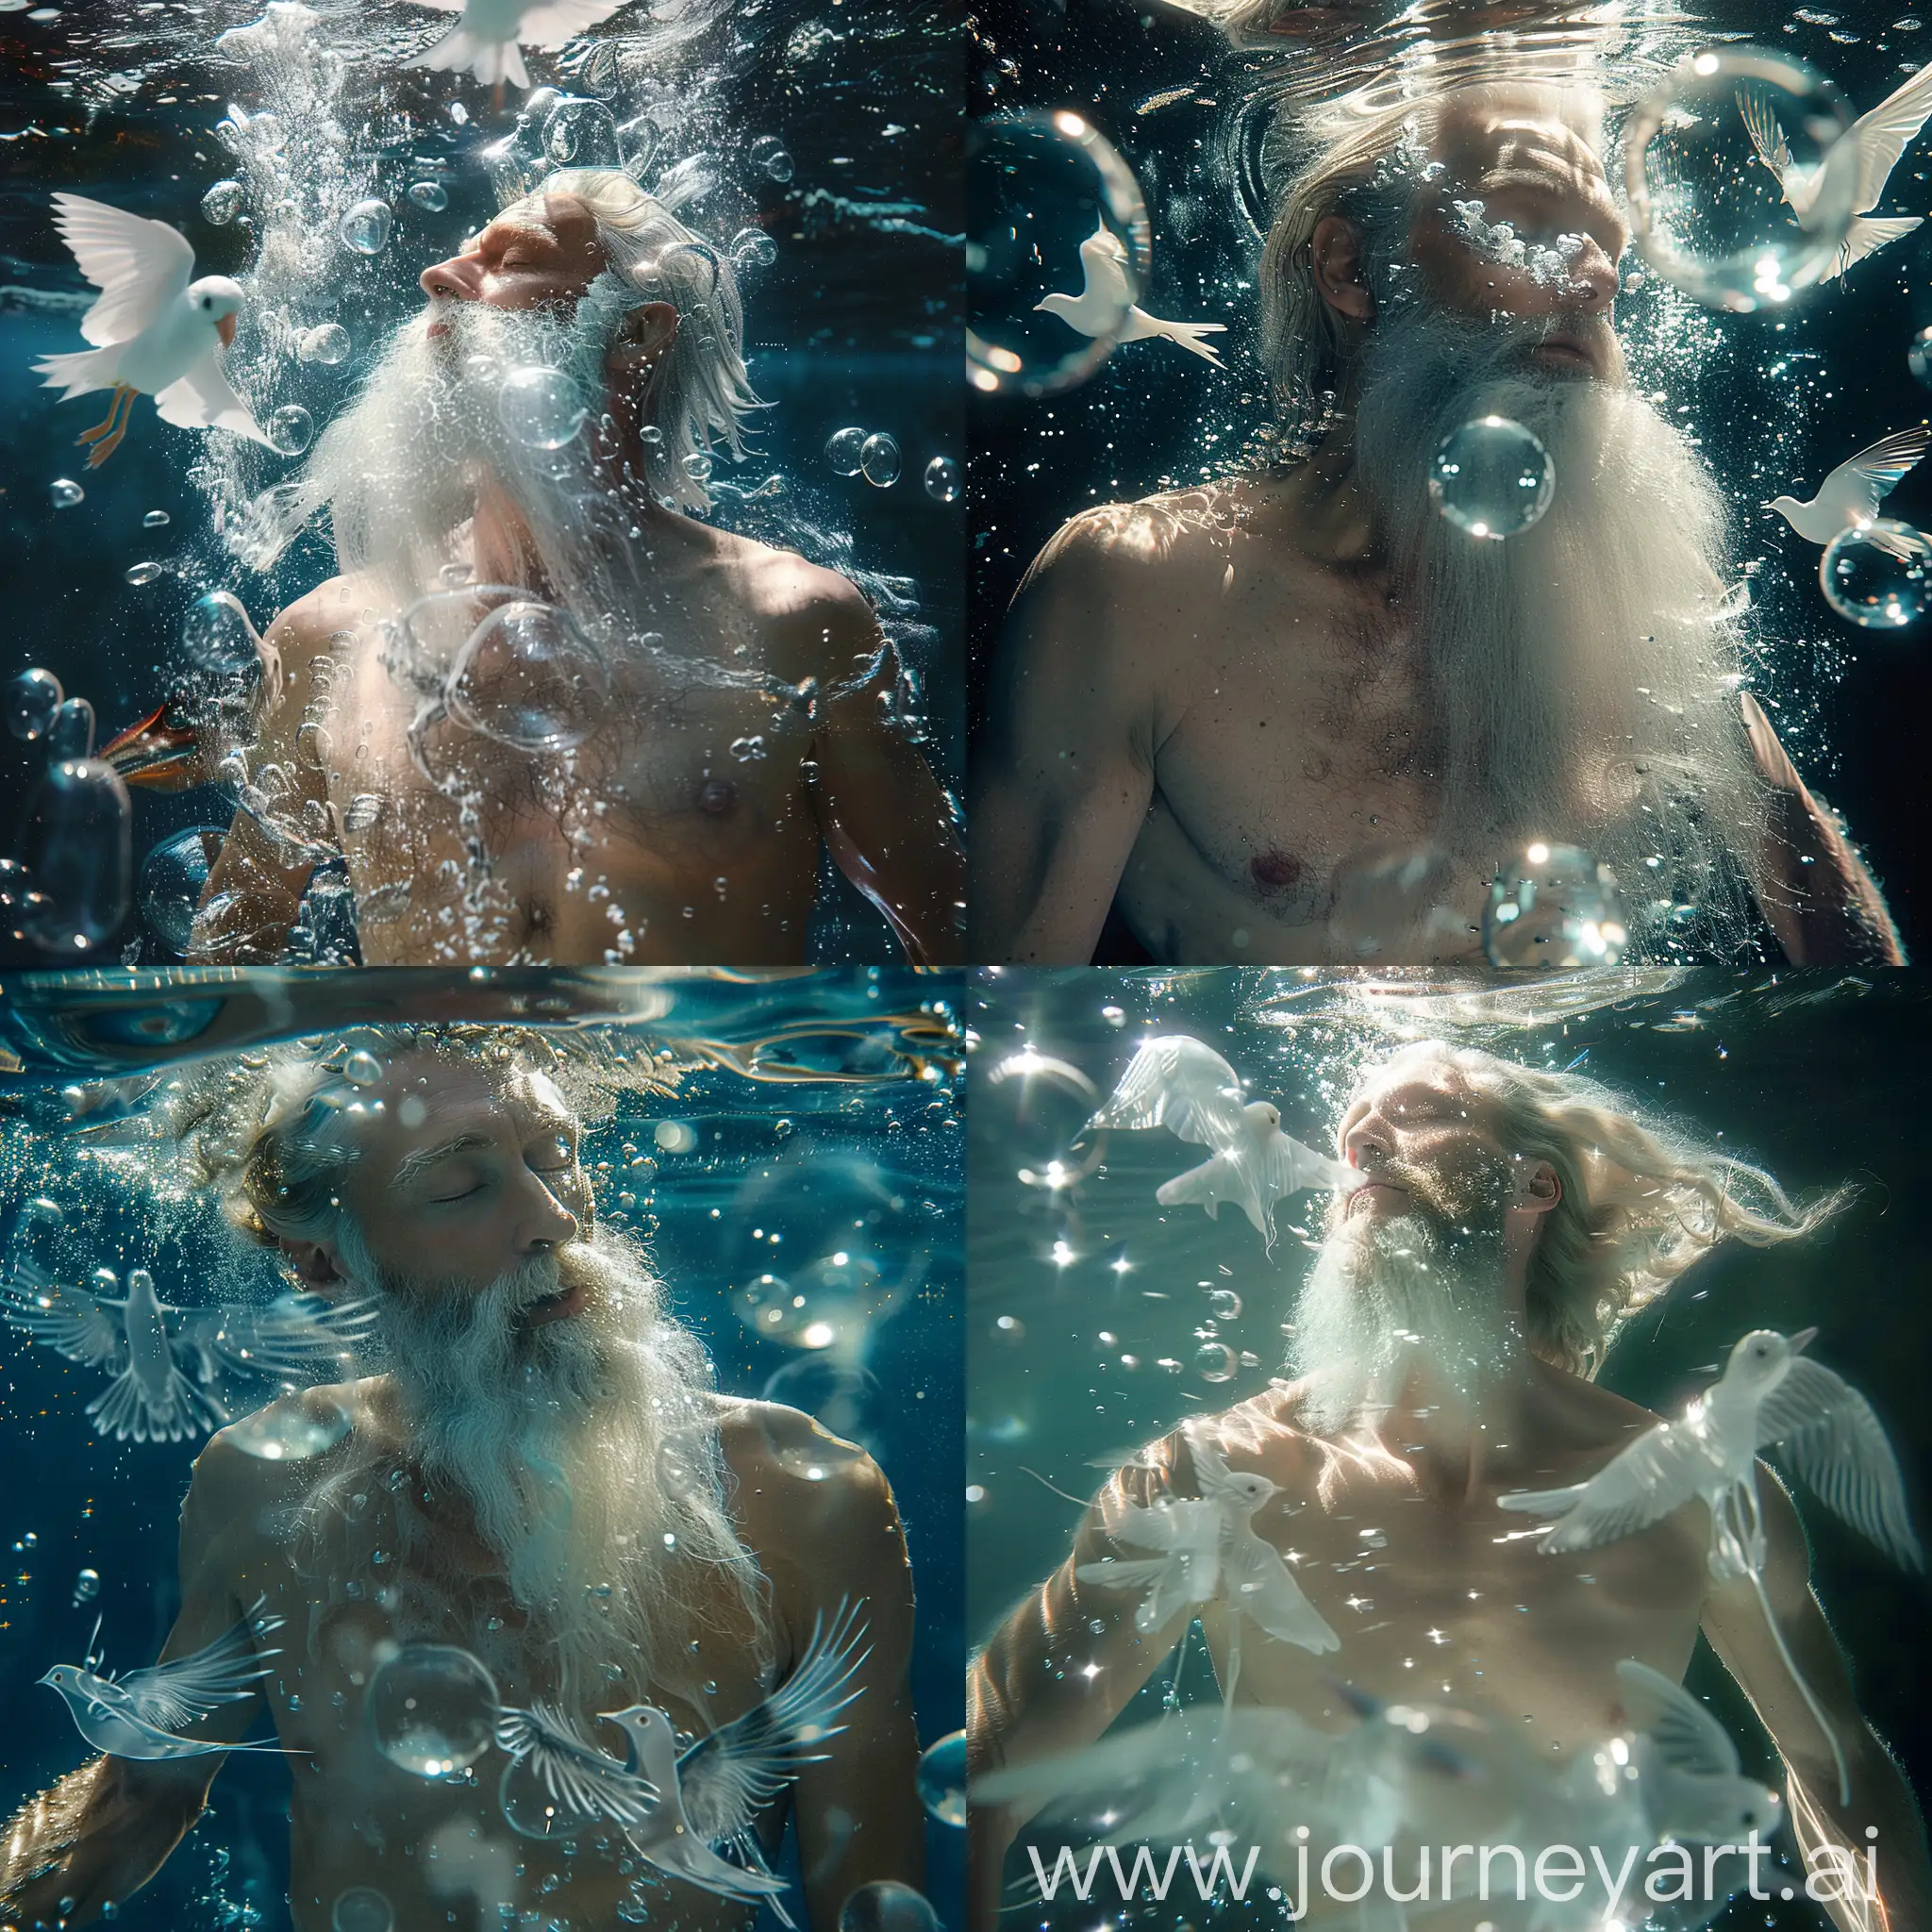 A captivating cinematic image of a shirtless beautiful man with long white beard with eyes closed underwater, few realistic large bubbles, reflection of underwater light all over him, three transparent birds swimming near him.